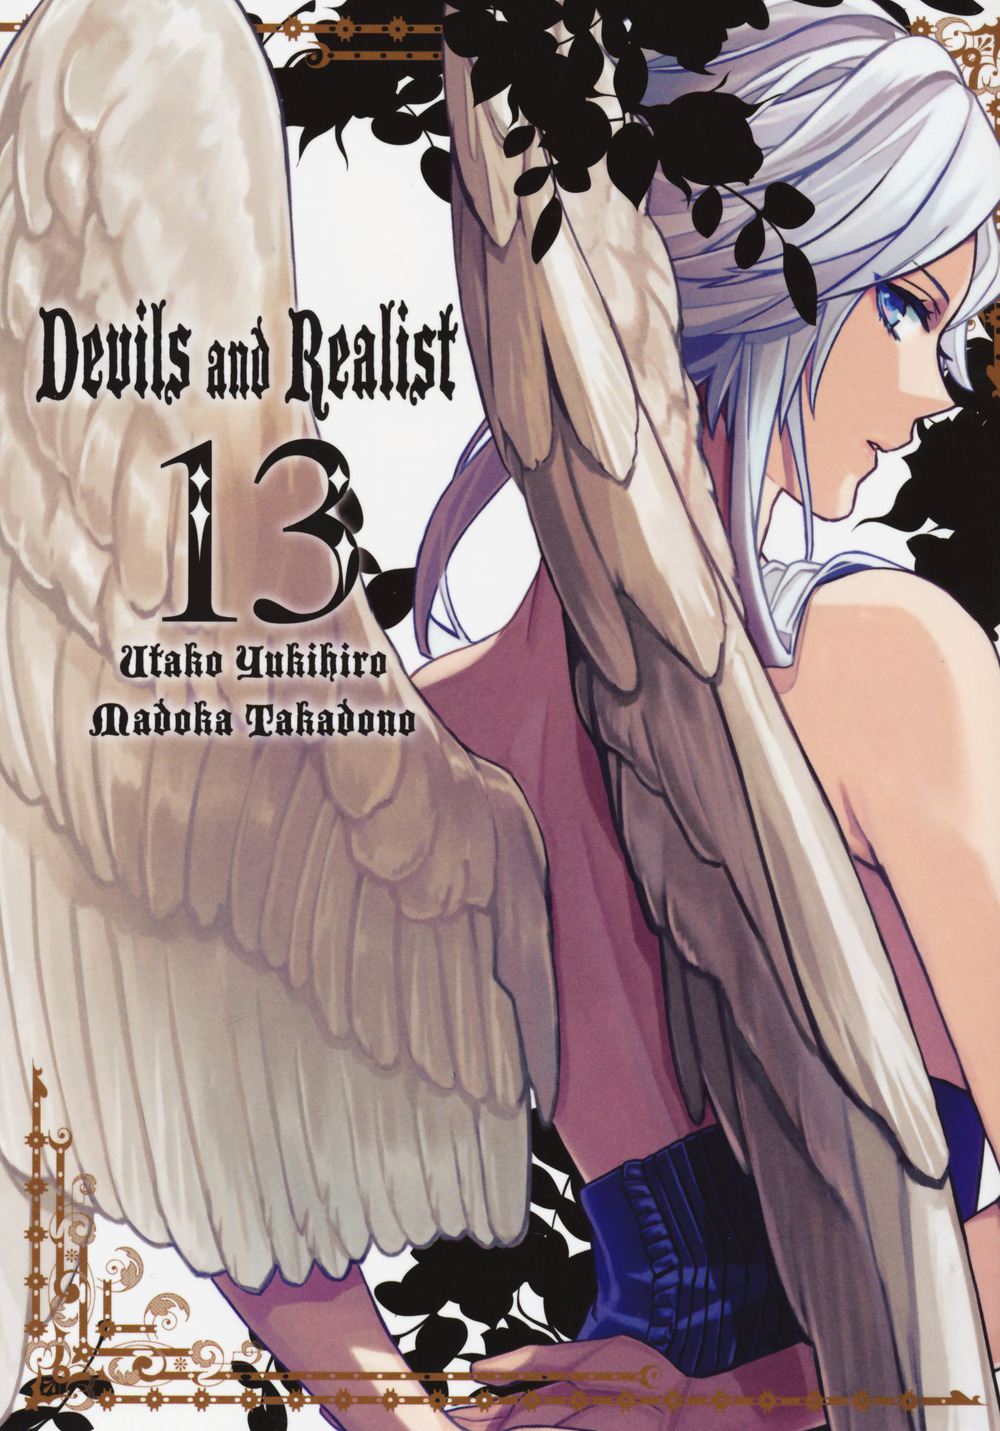 Devils and realist. Vol. 13